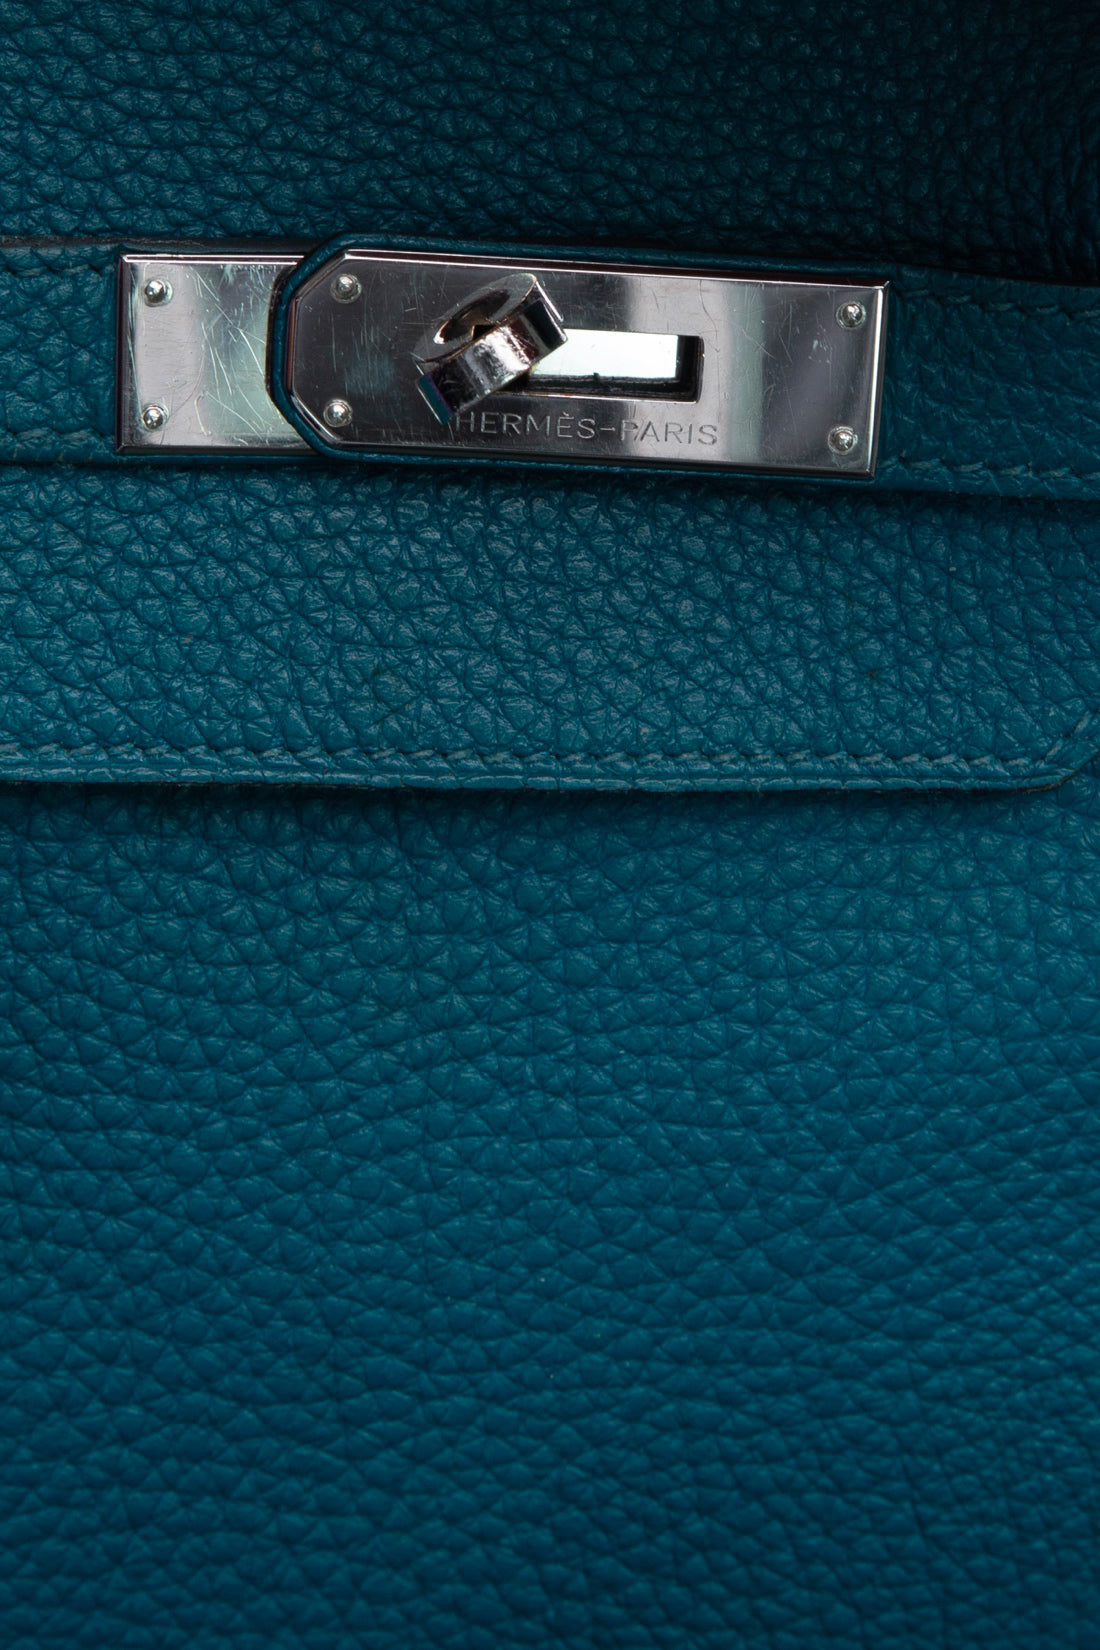 6 THINGS YOU SHOULD KNOW ABOUT THE LOUIS VUITTON PATINA - thepursequeen